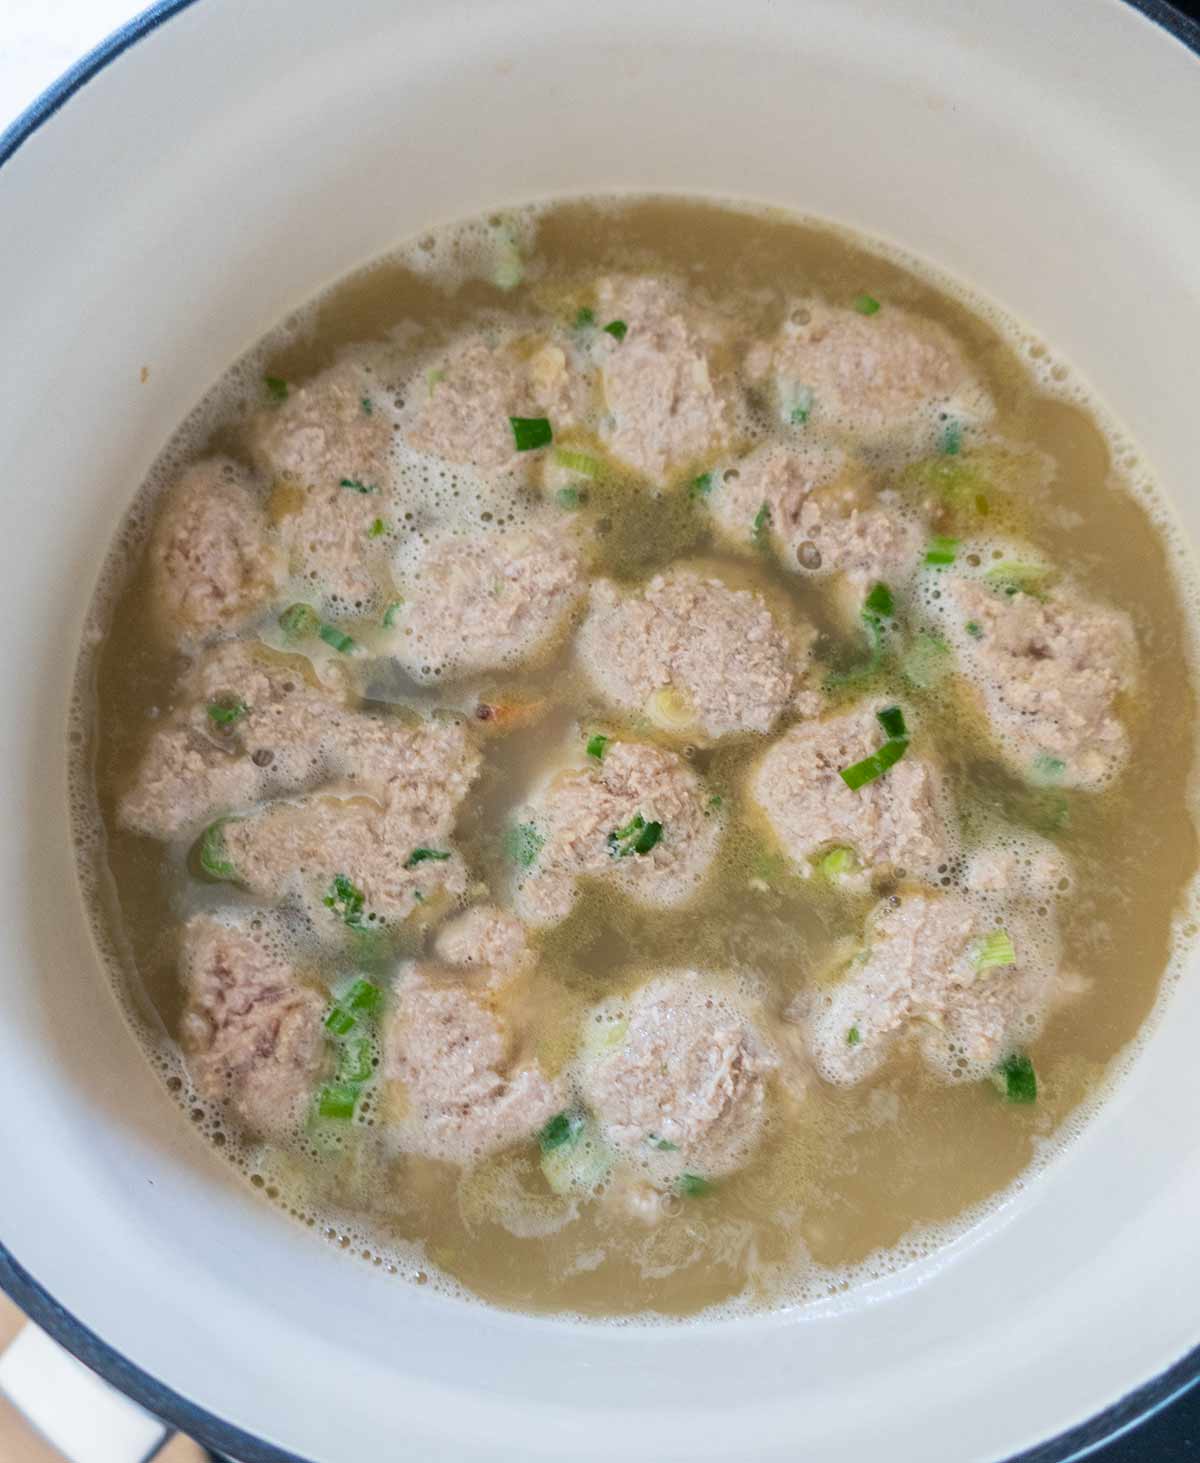 meatballs cooking in broth